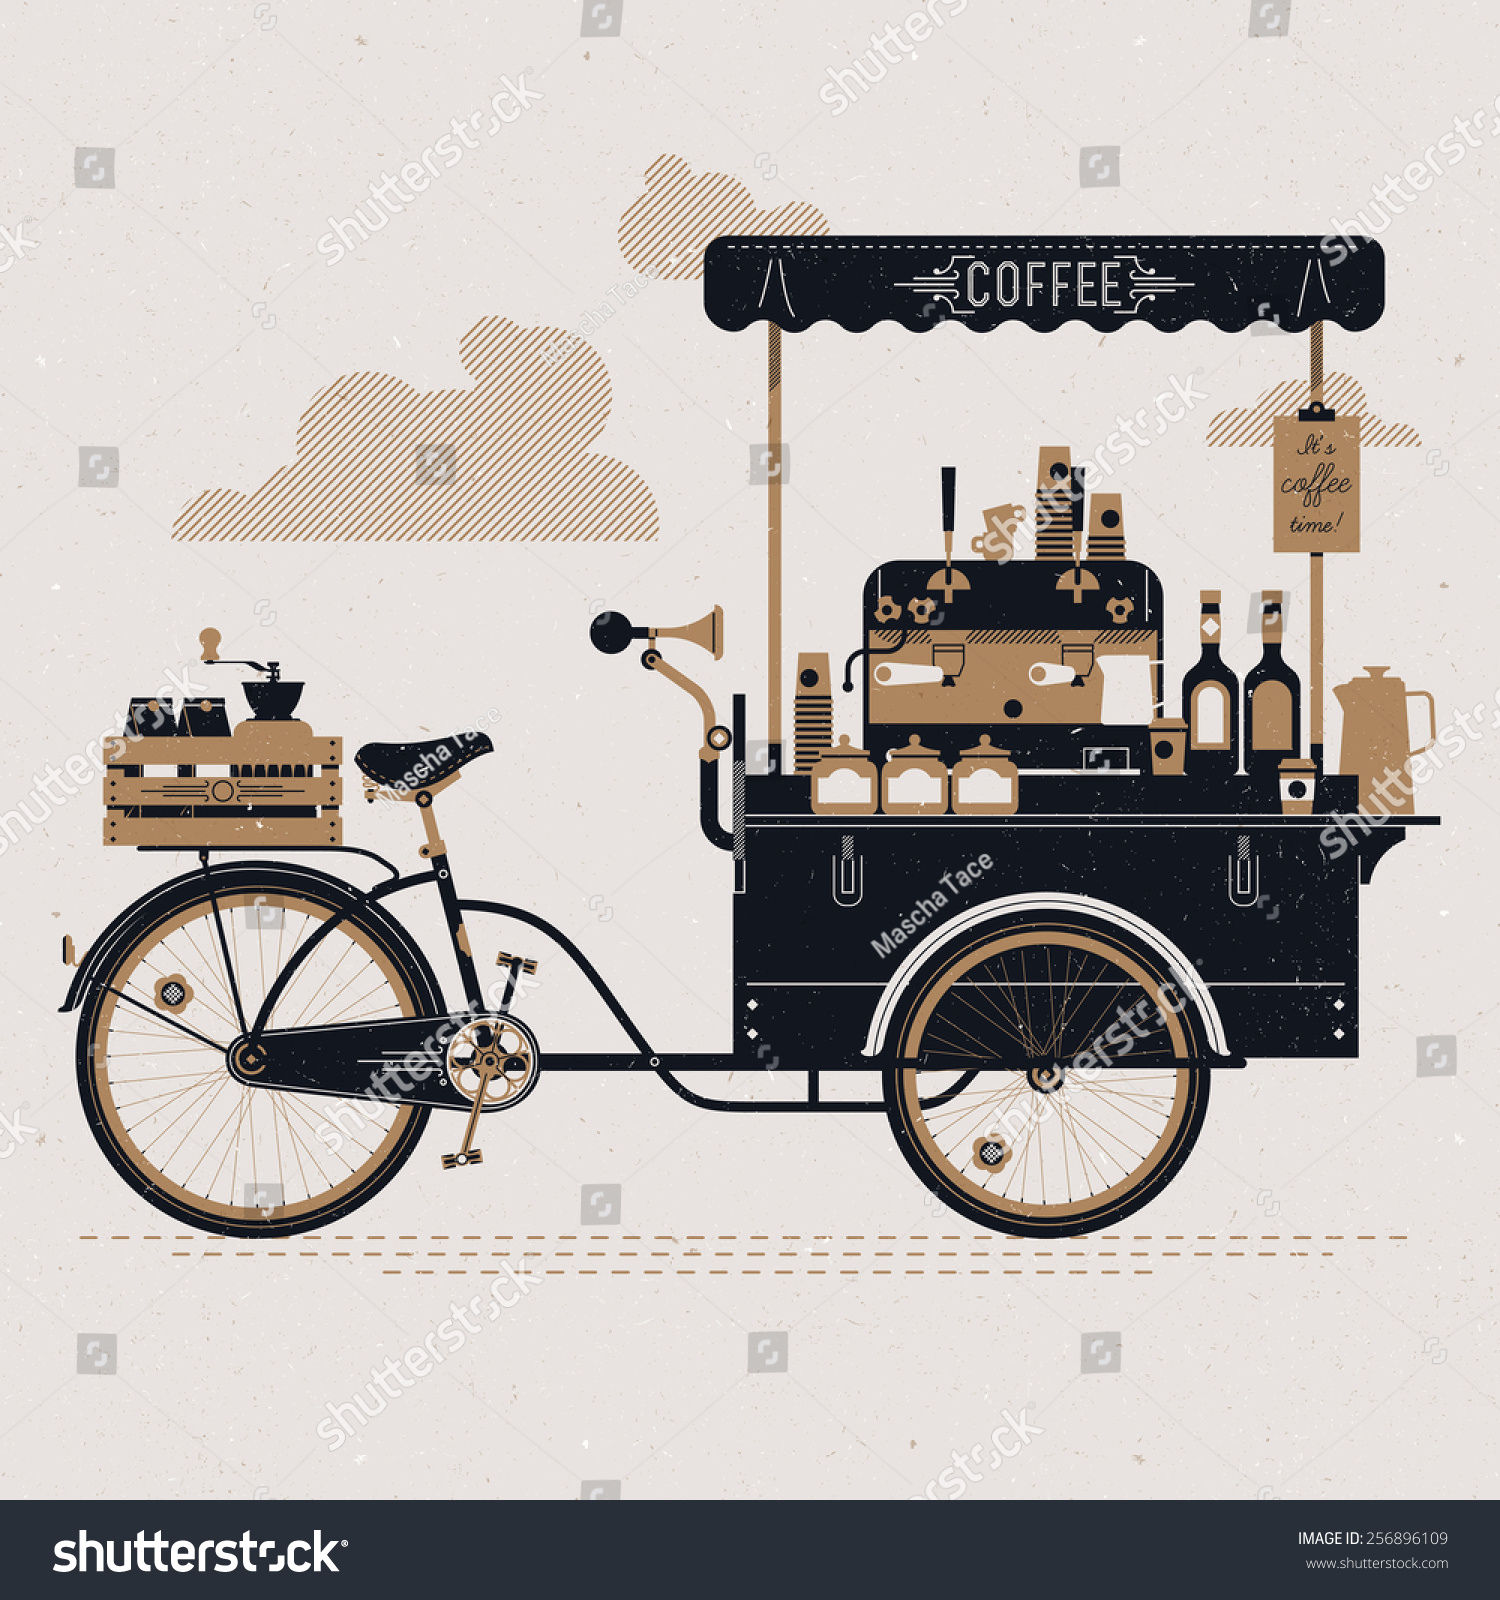 SVG of Creative detailed vector street coffee bicycle cart three colored design element with espresso machine, syrup bottles, wooden crate on rear rack, disposable cups and more. Subtle rough paper texture svg